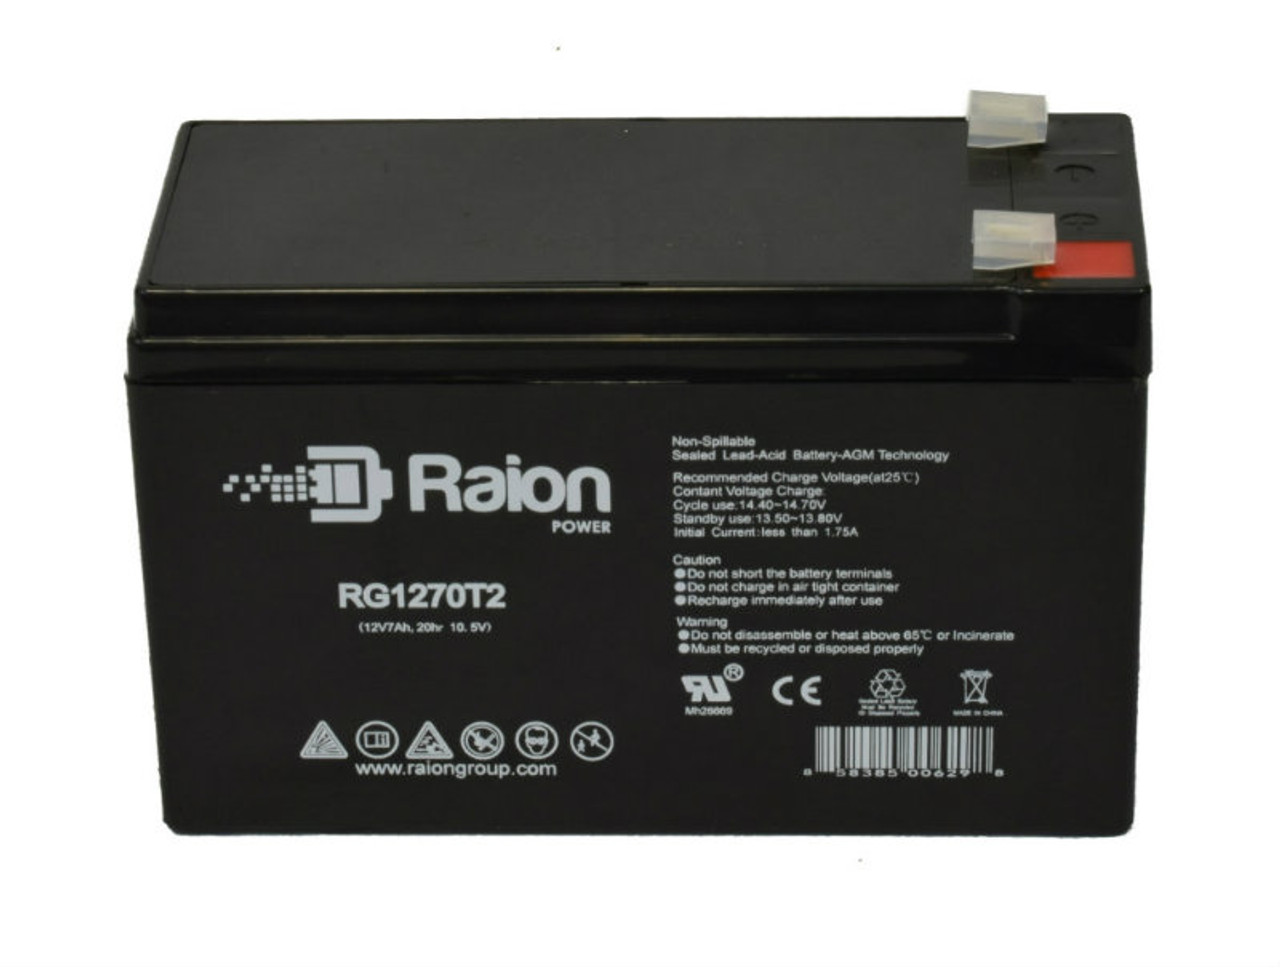 Raion Power RG1270T2 12V 7Ah Lead Acid Battery for Razor 13112445 E200 Electric-Powered Scooter Teal